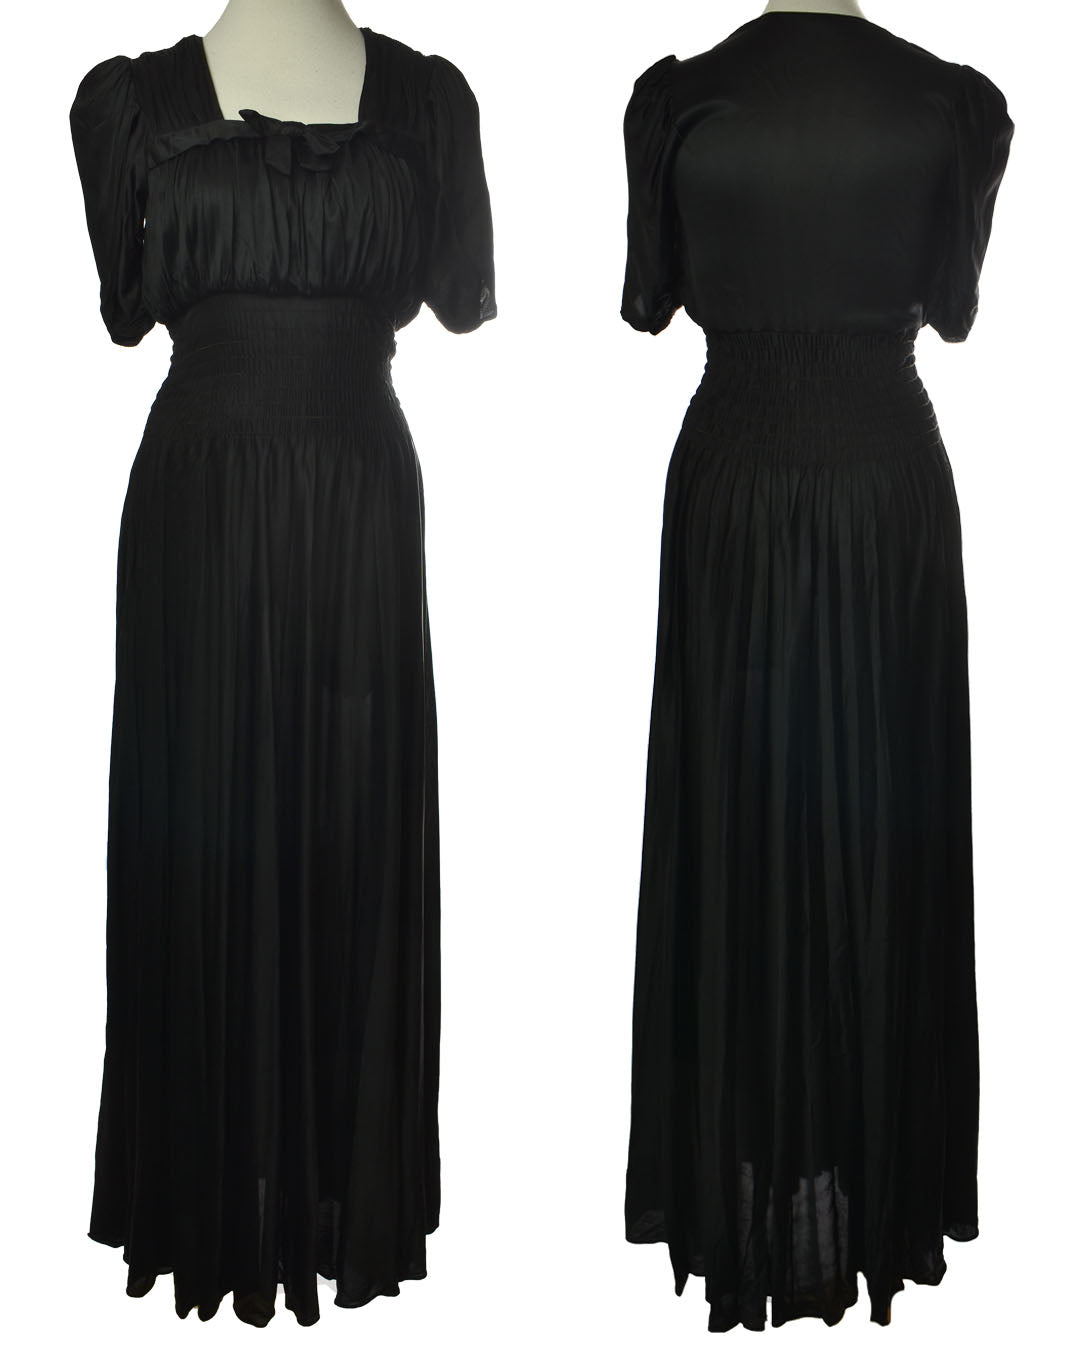 Vintage 40s Incredible Ruched Detail Knit Dress - Black Gothic Style with Puffed Sleeves